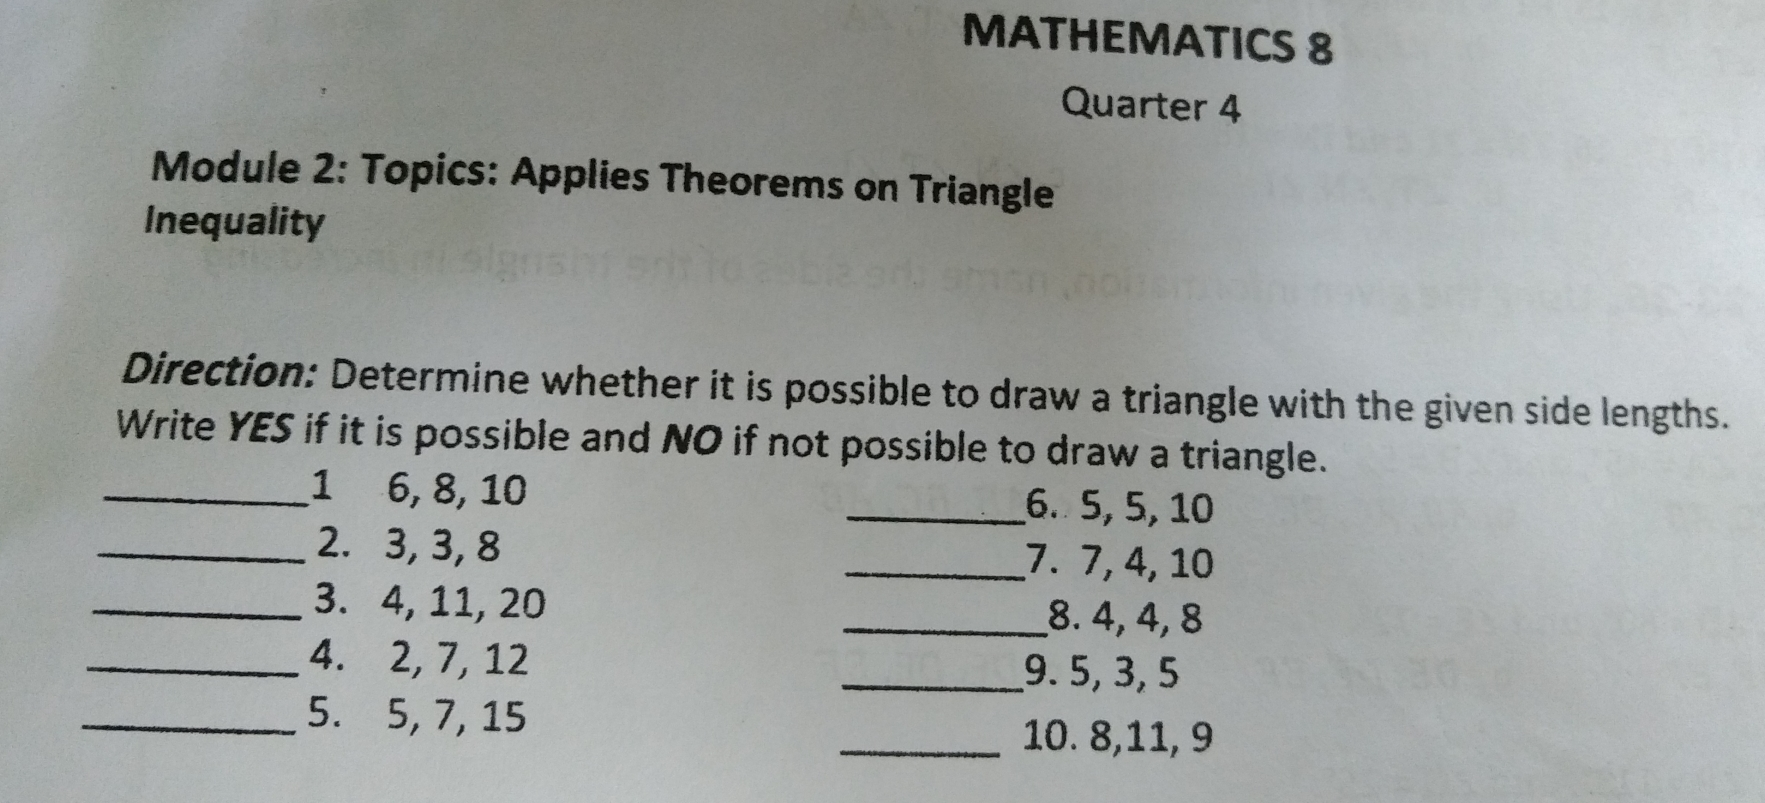 MATHEMATICS 8 Quarter 4 Module 2: Topics: Applies Theorems on Triangle Inequality Direction: Determine whether it is possible to draw a triangle with the given side lengths. Write YES if it is possible and NO if not possible to draw a triangle.. .1 6, 8, 10 6. 5, 5, 10 2. 3, 3, 8 7. 7, 4, 10 3. 4, 11, 20 8.4, 4, 8 4. 2, 7, 12 9.5, 3, 5 5. 5, 7, 15 10. 8,11, 9